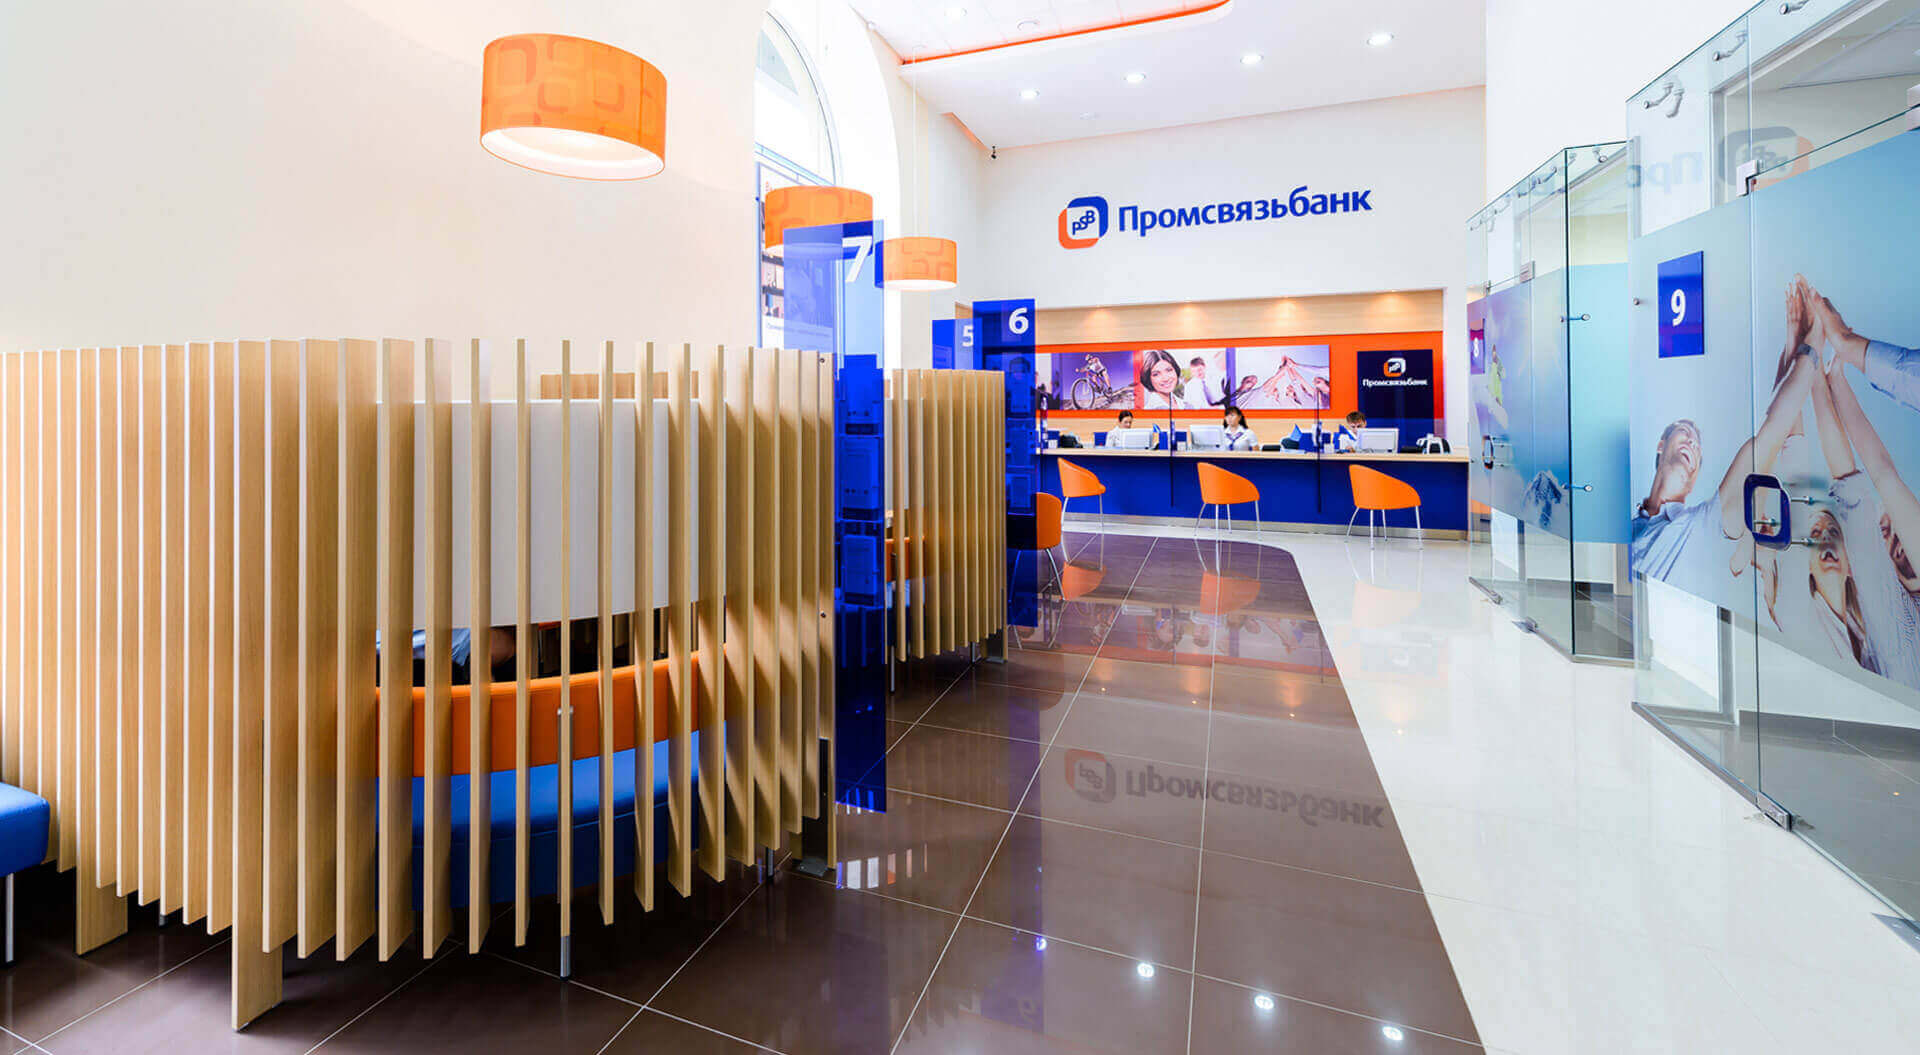 Bank innovation new concept ideas and trends in lifestyle branch design‎ - PSB Moscow